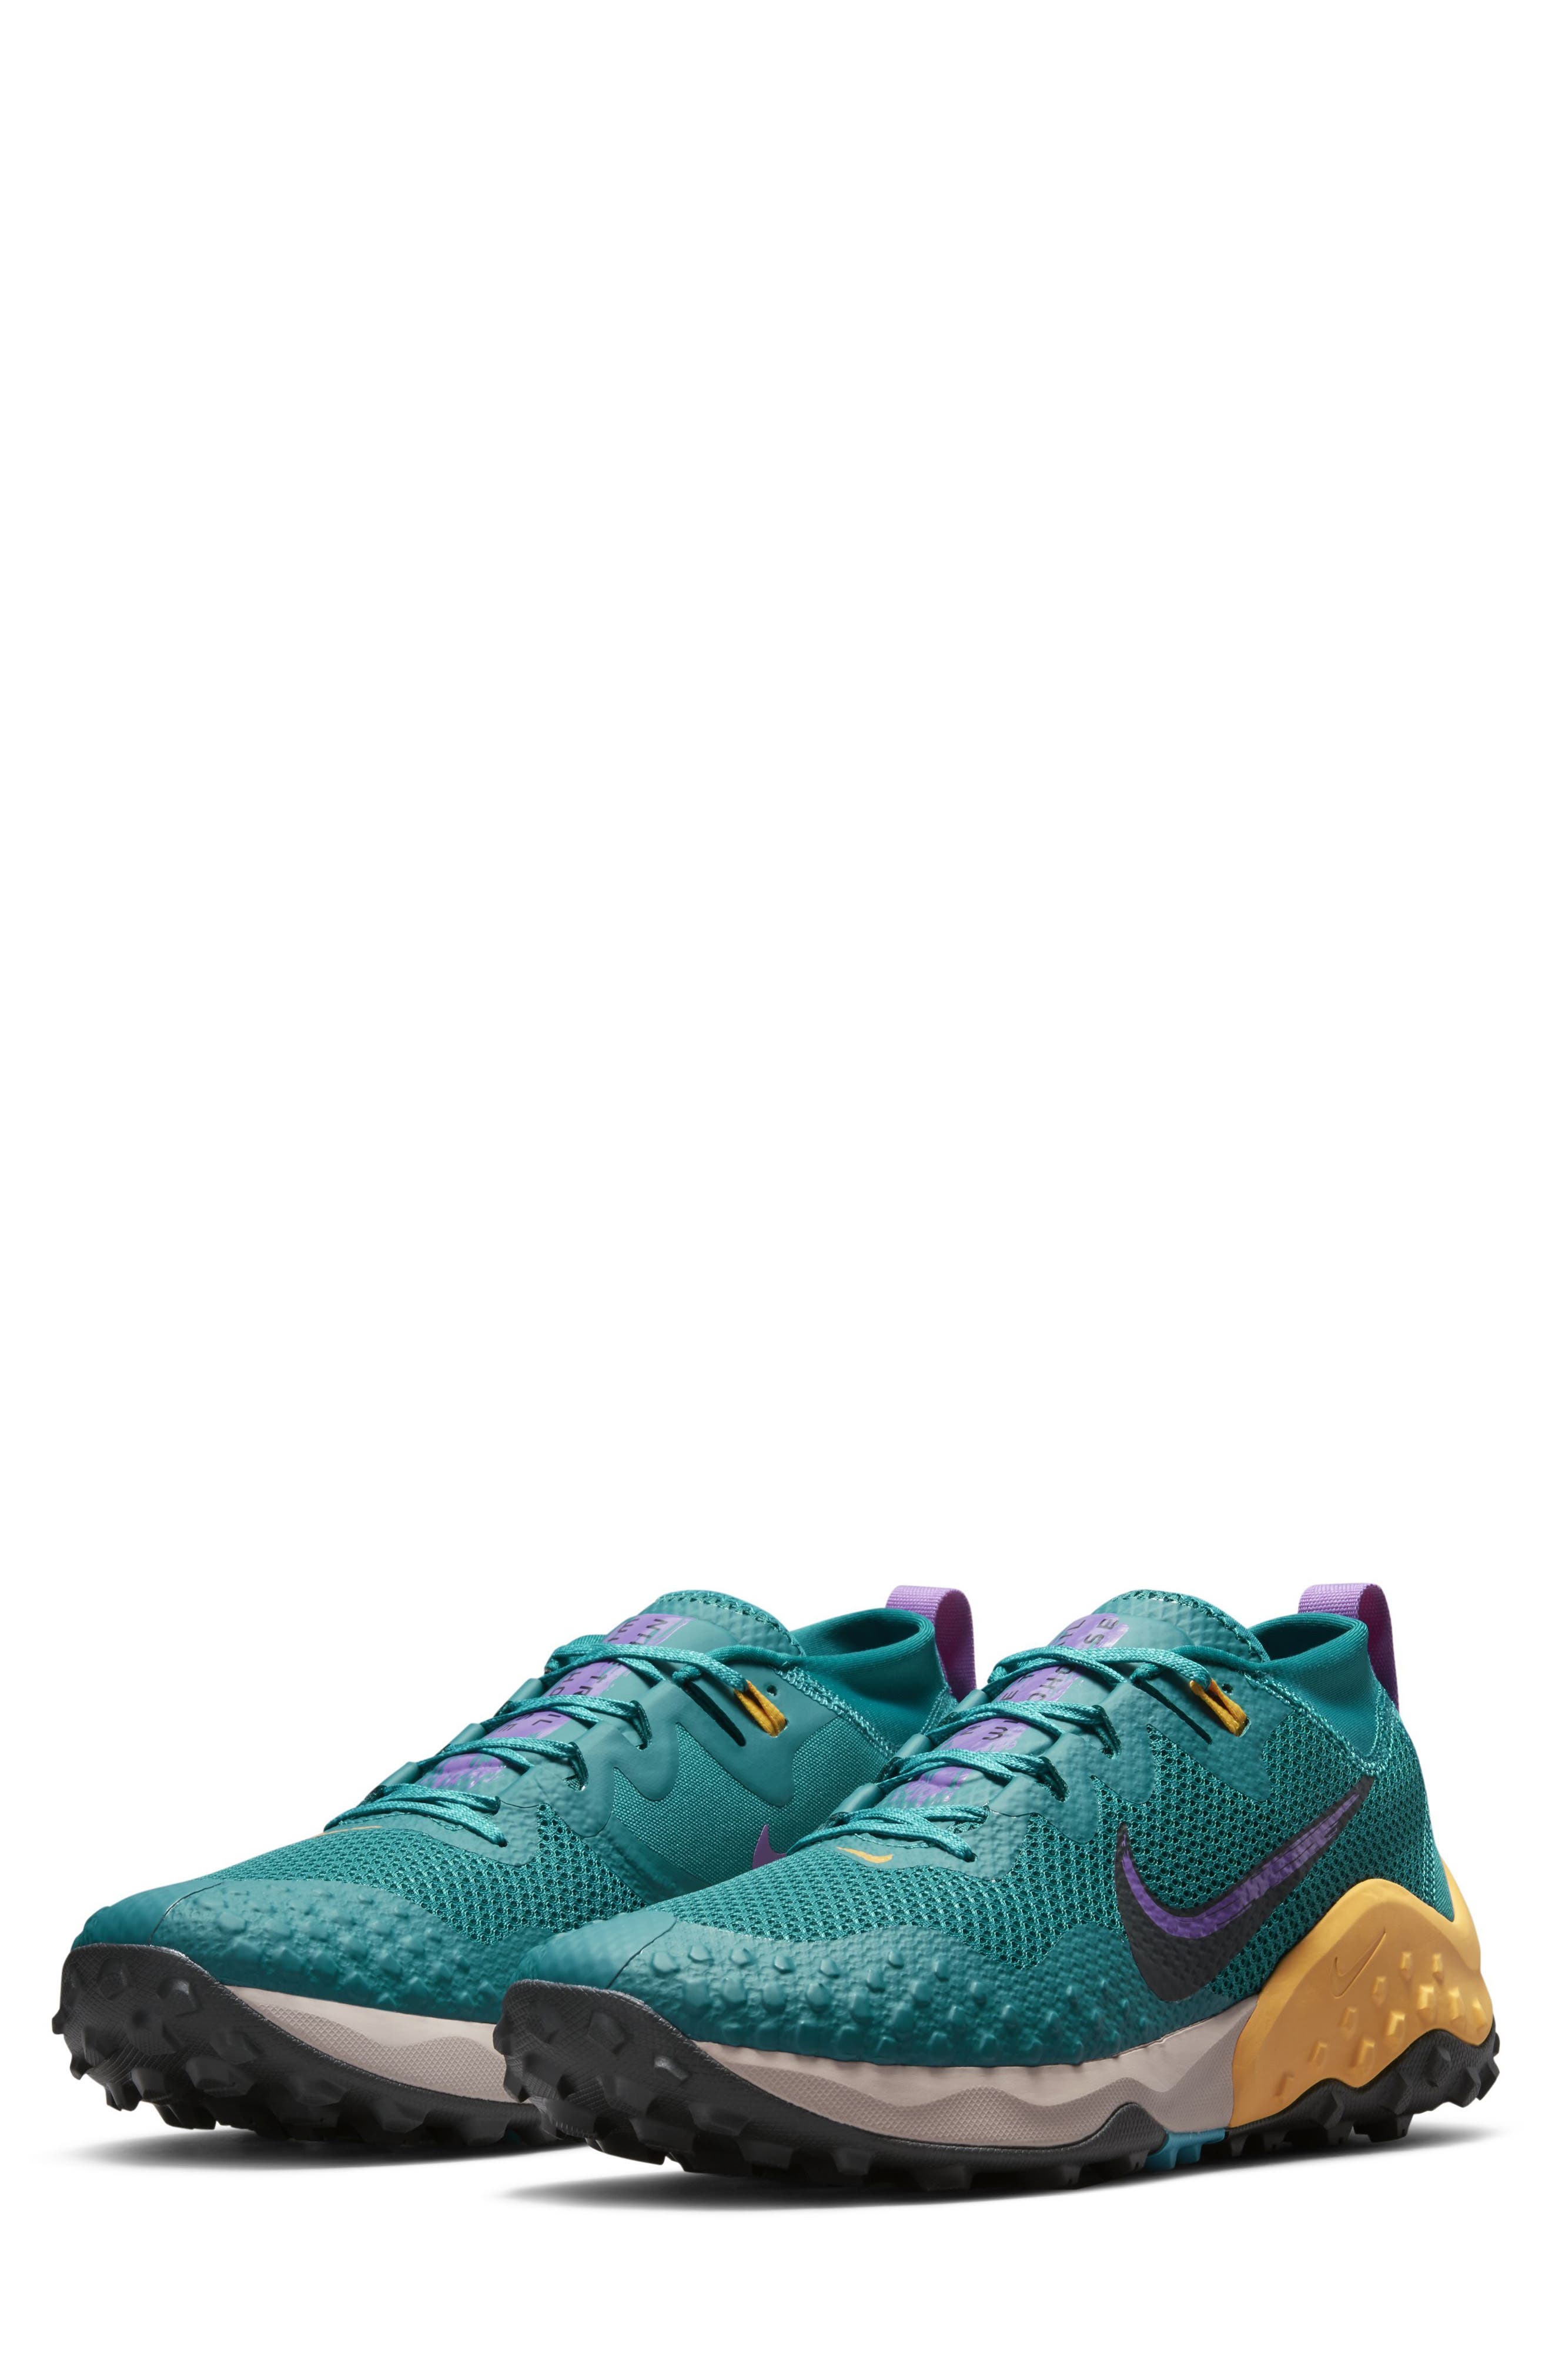 mens teal shoes